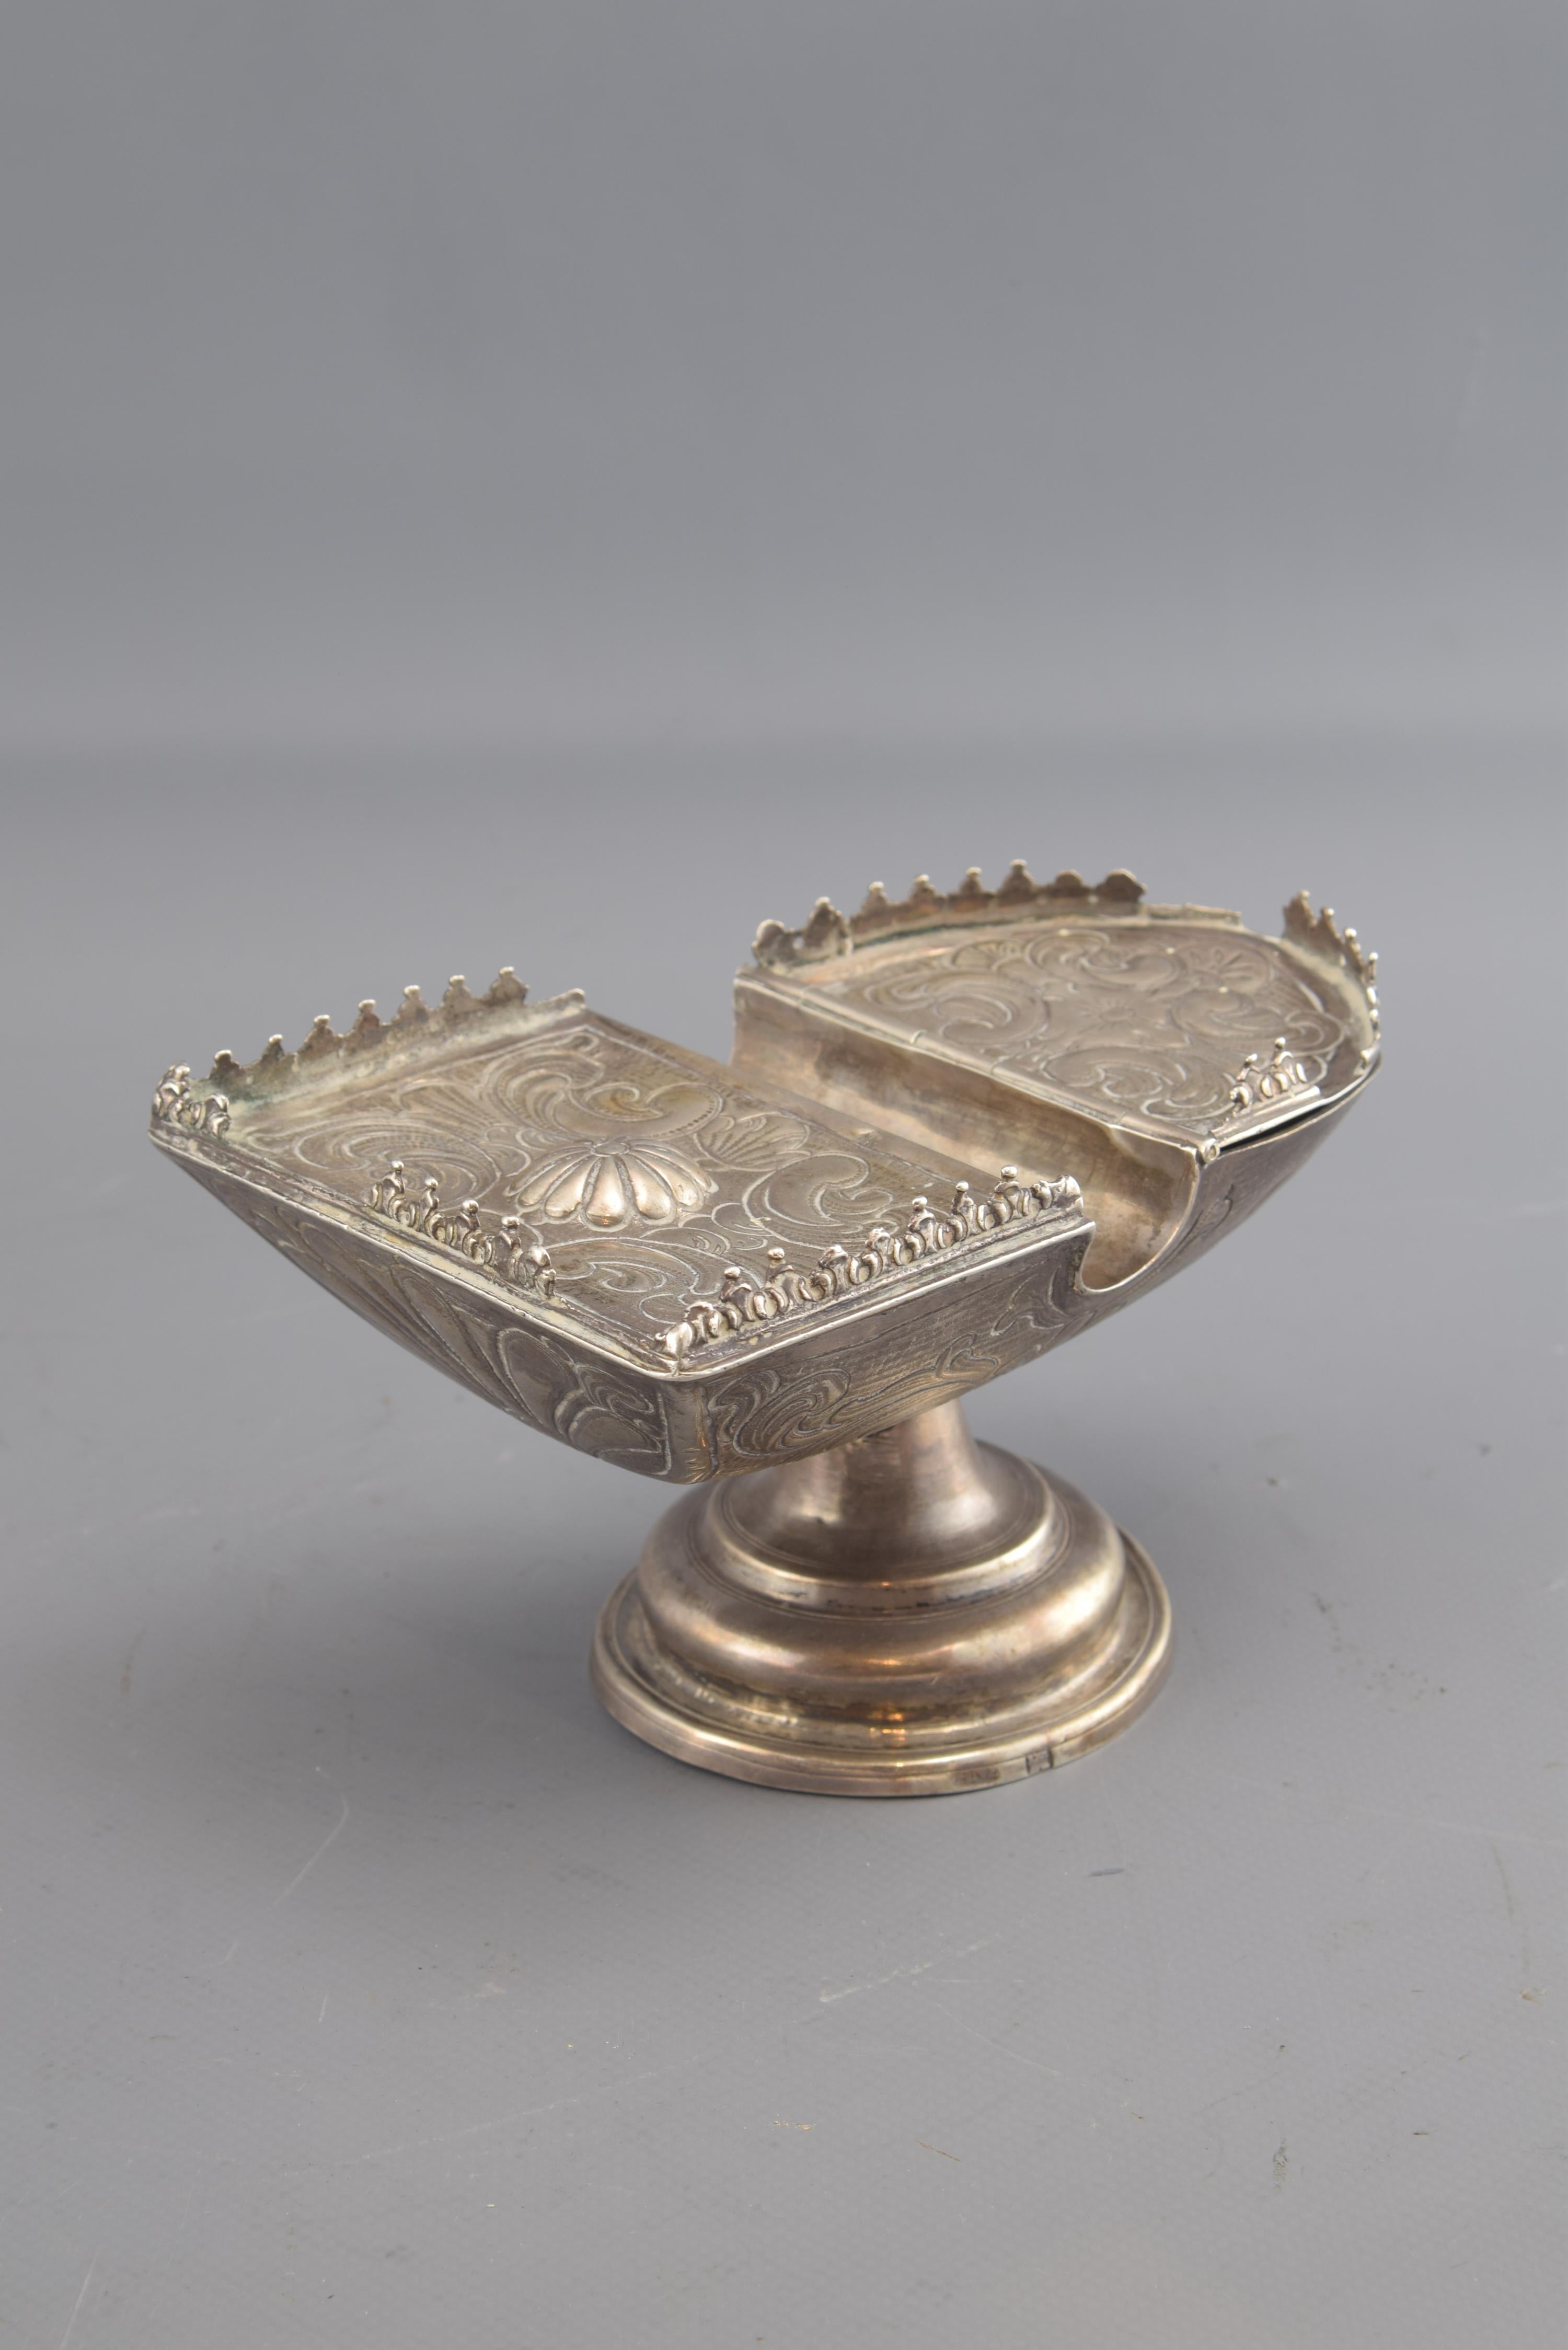 Silver incense boat (naviculae). SANZ DE VELASCO, Juan Antonio (1720-1778). Valladolid, Spain, 18th century. With hallmarks.
The hallmarks on the base place the realization of the piece in Valladolid (note that it is the one which some experts